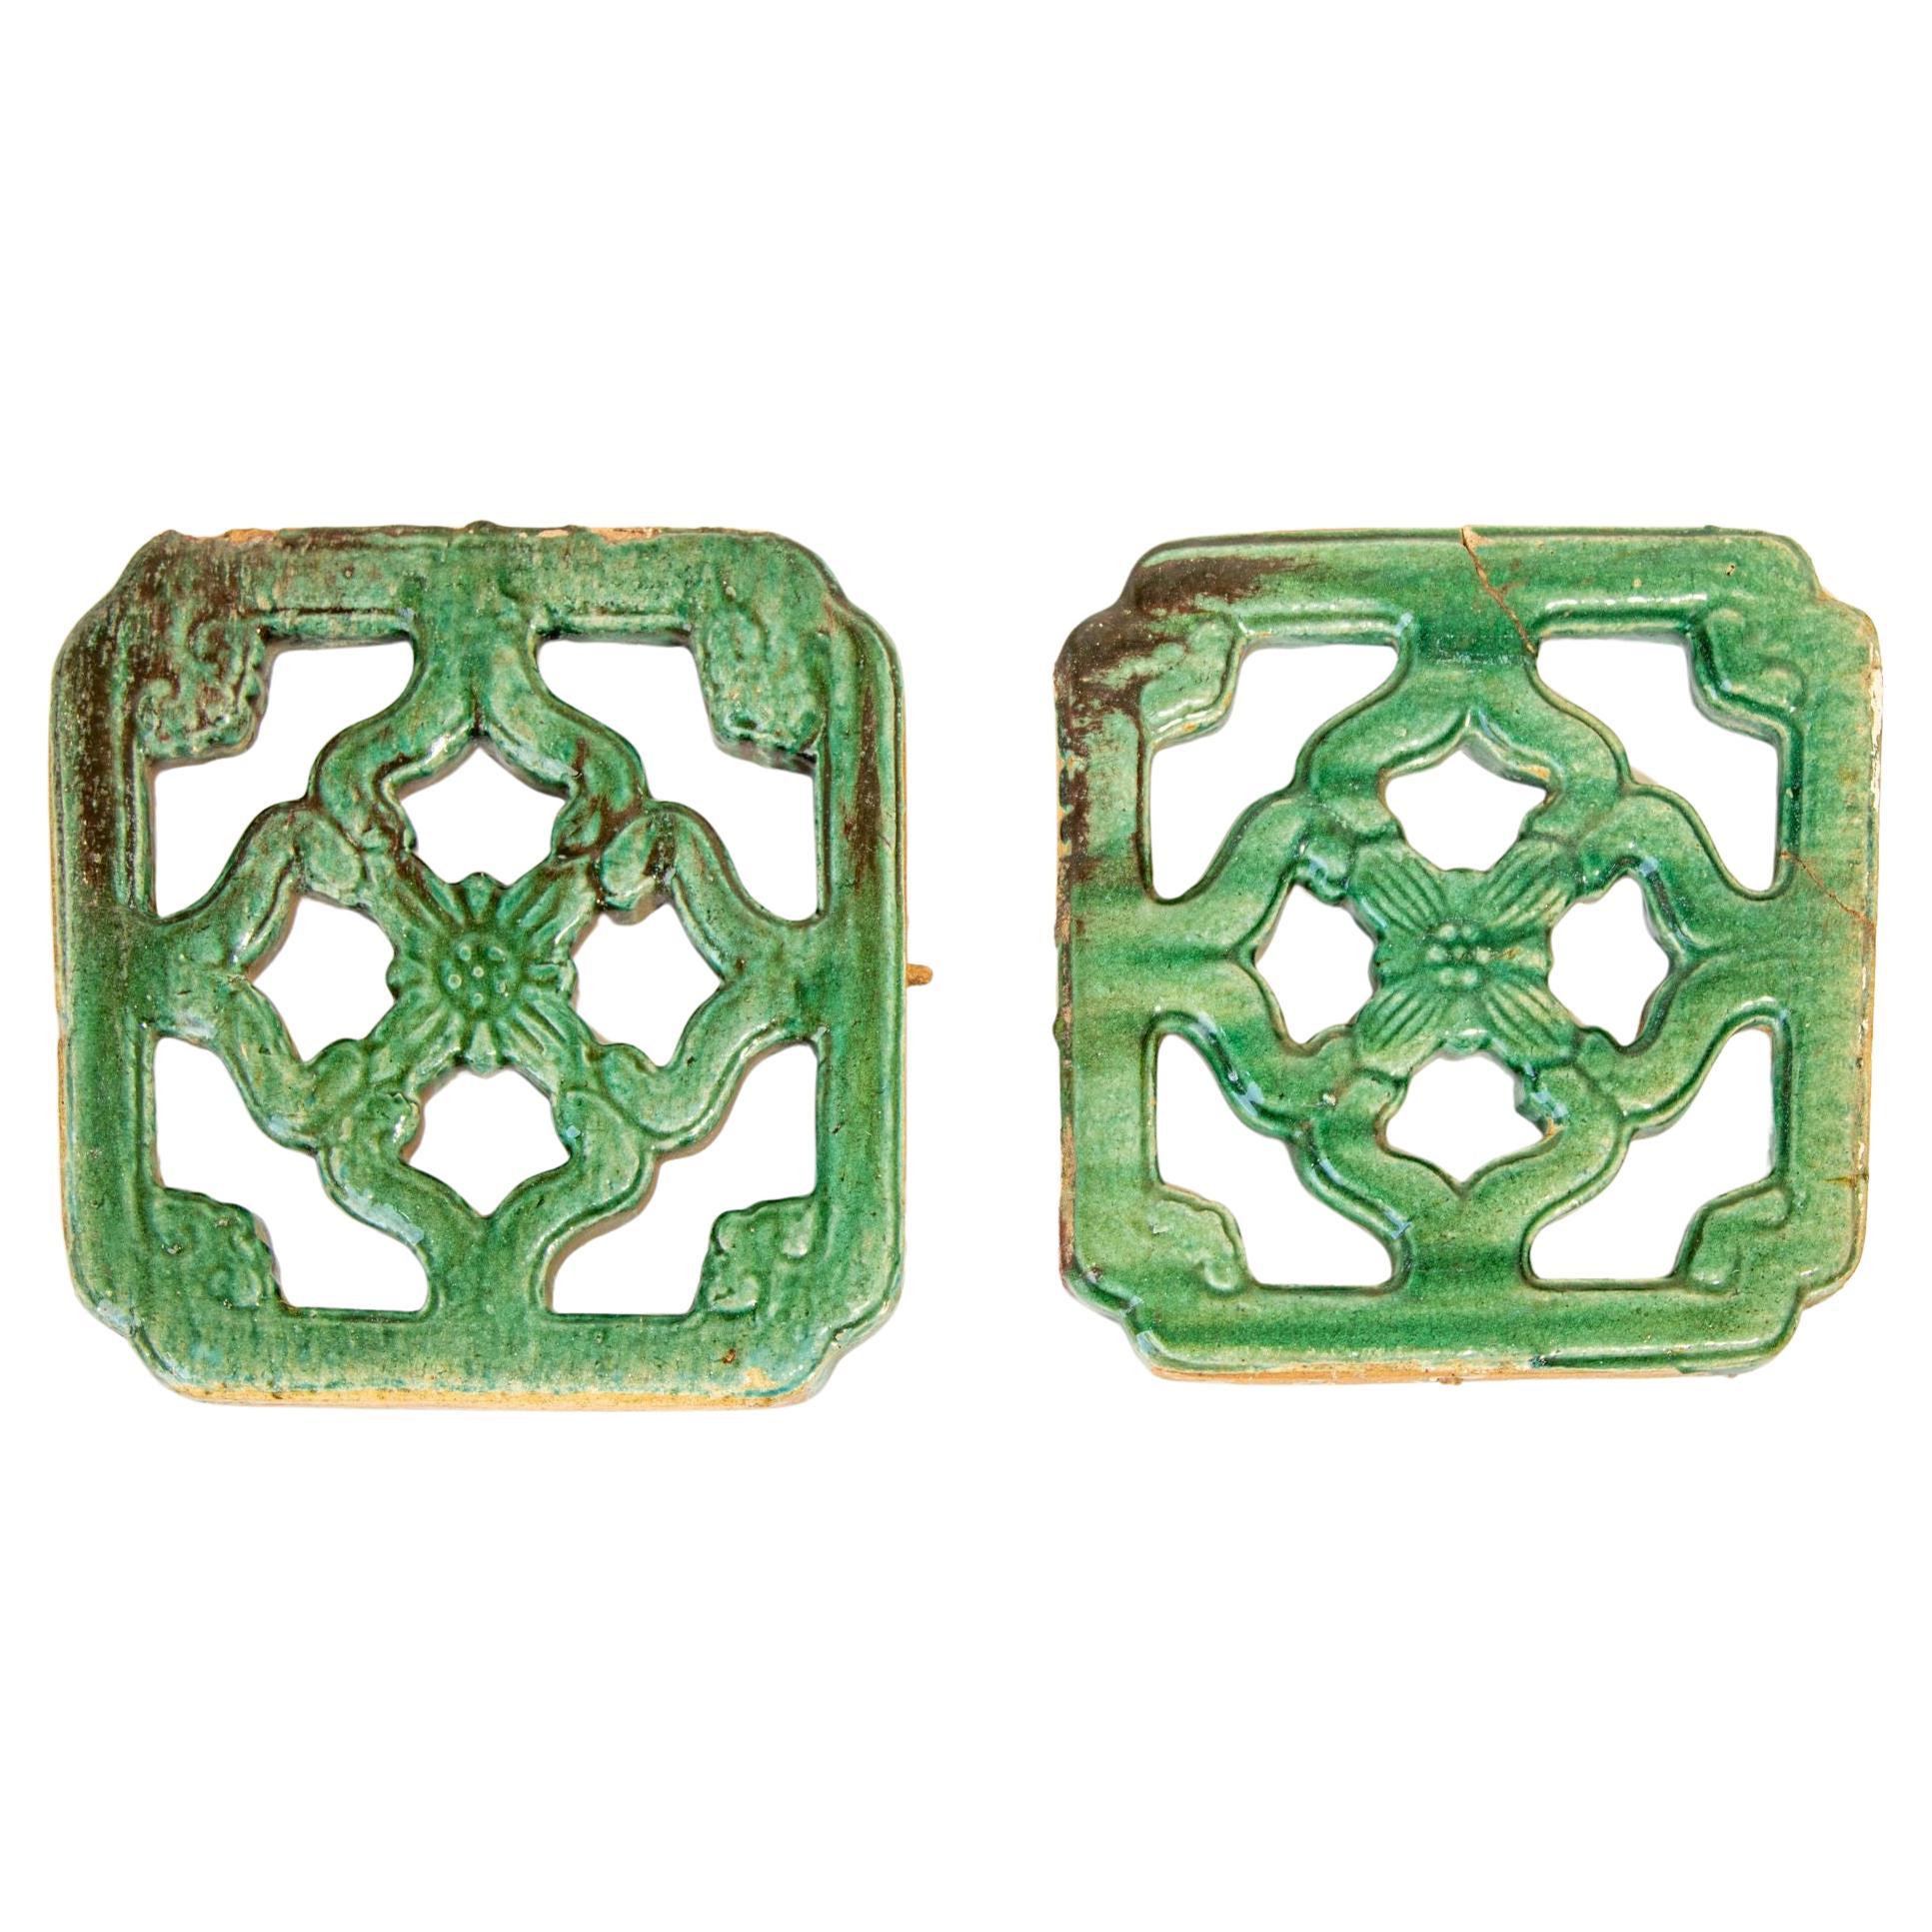 Antique Chinese Emerald Green Glazed Architectural Tile, circa 1900 Set of 2